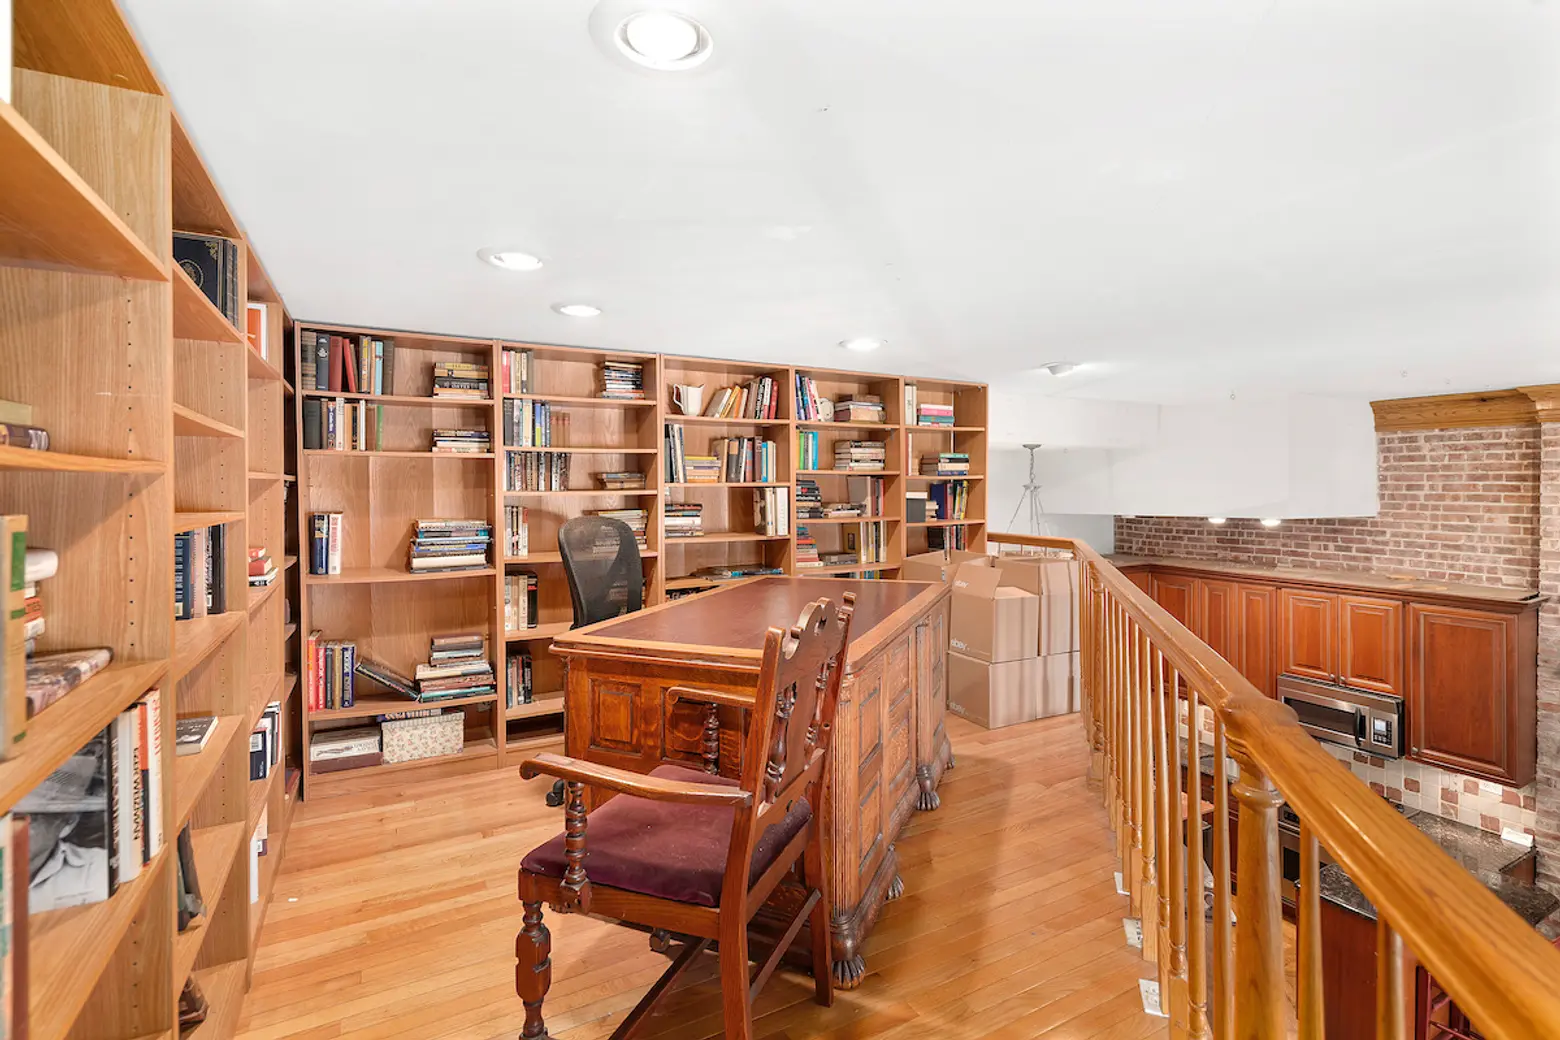 22 West 76th Street, Central Park West Upper West Side, cool listings, co-ops